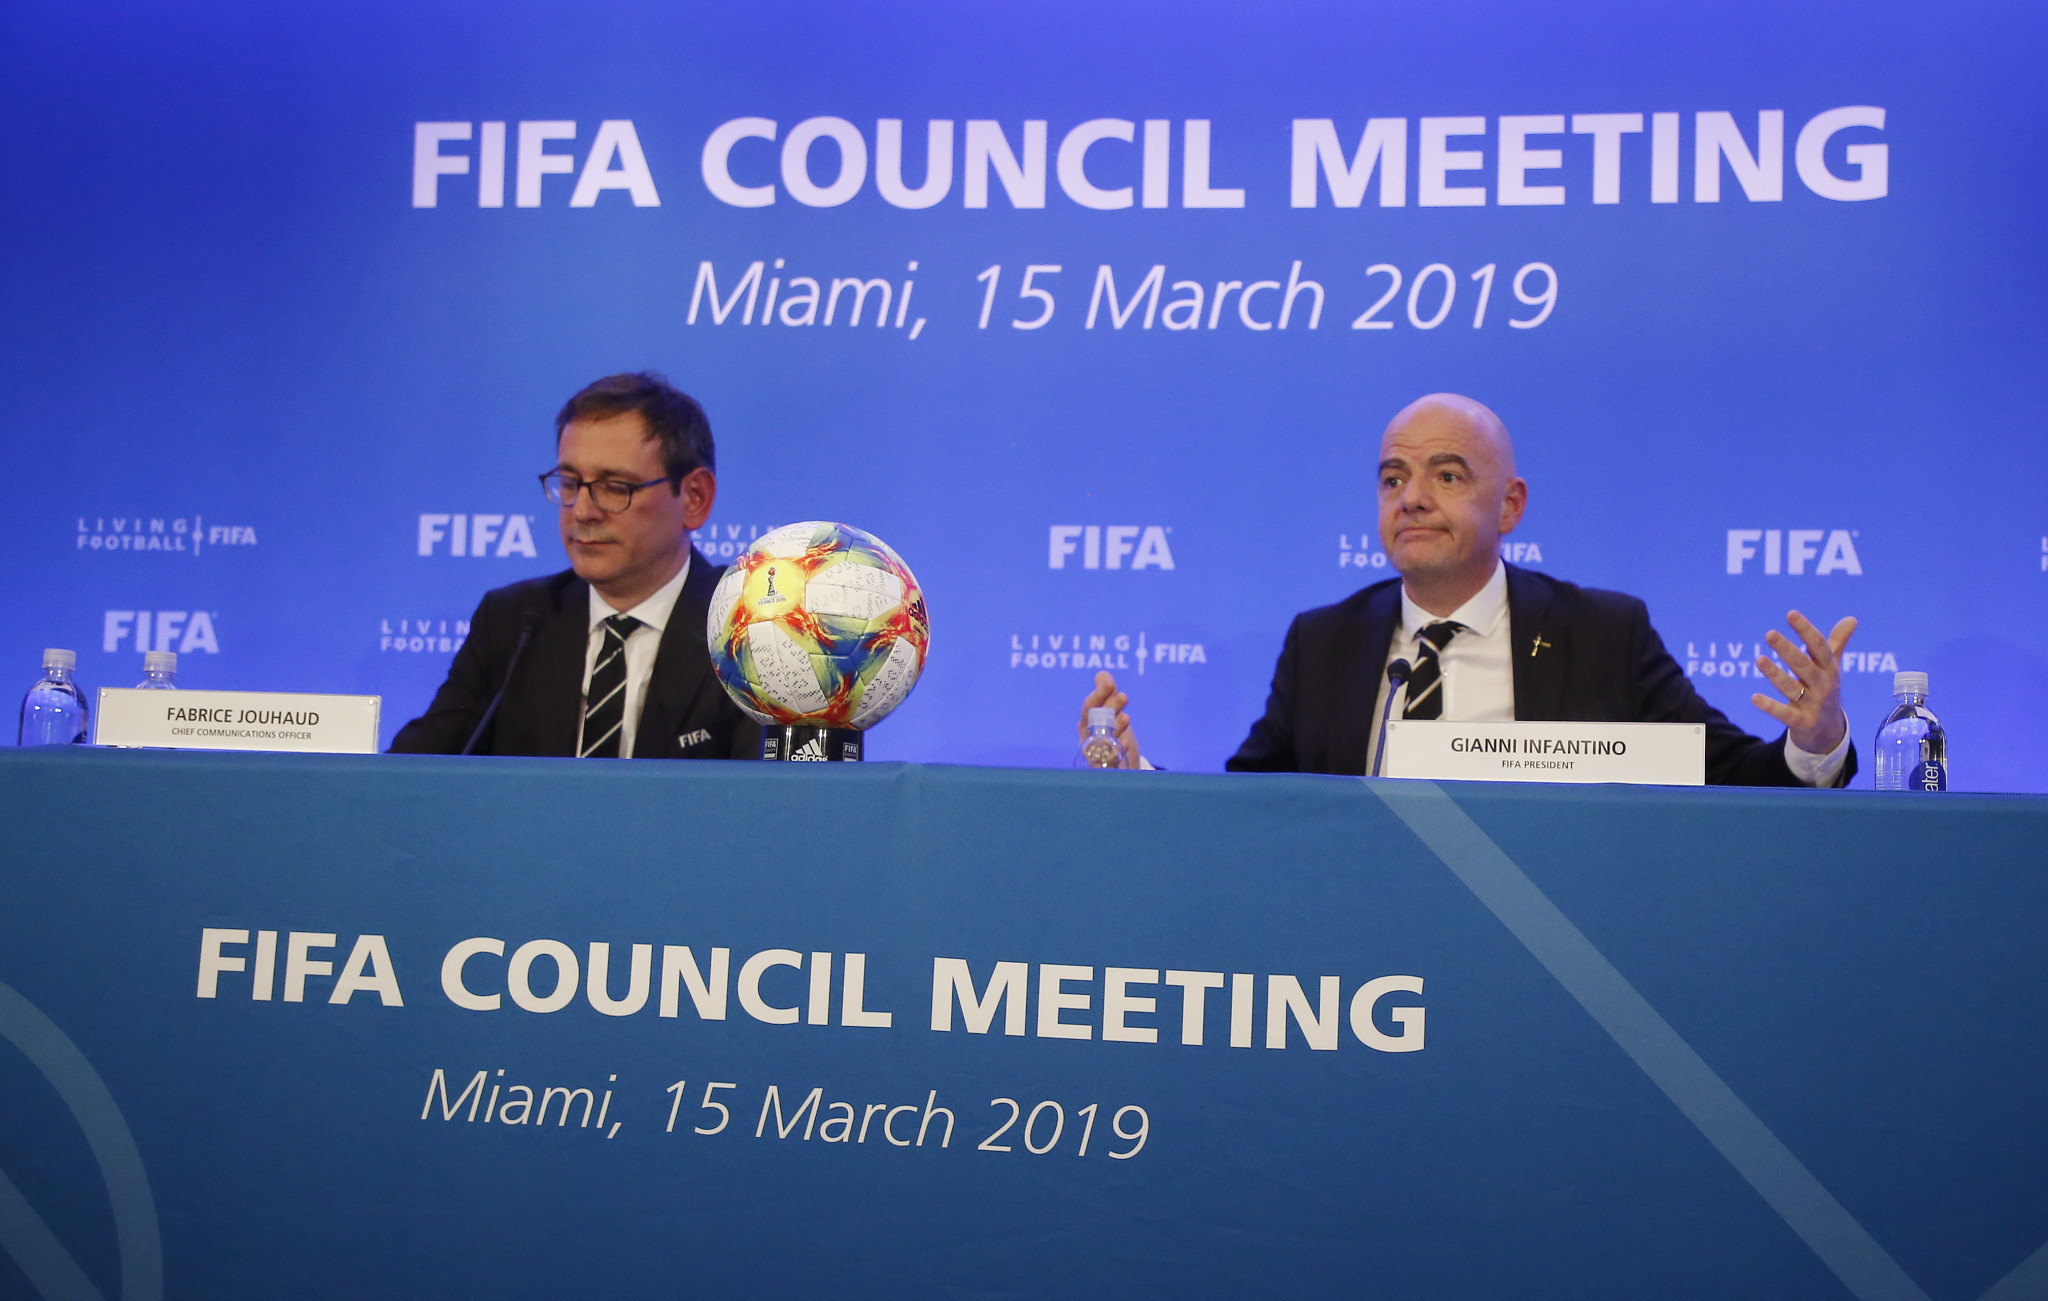 FIFA Council approves plans for 2022 World Cup to feature 48 teams and Qatar to share matches with neighbours